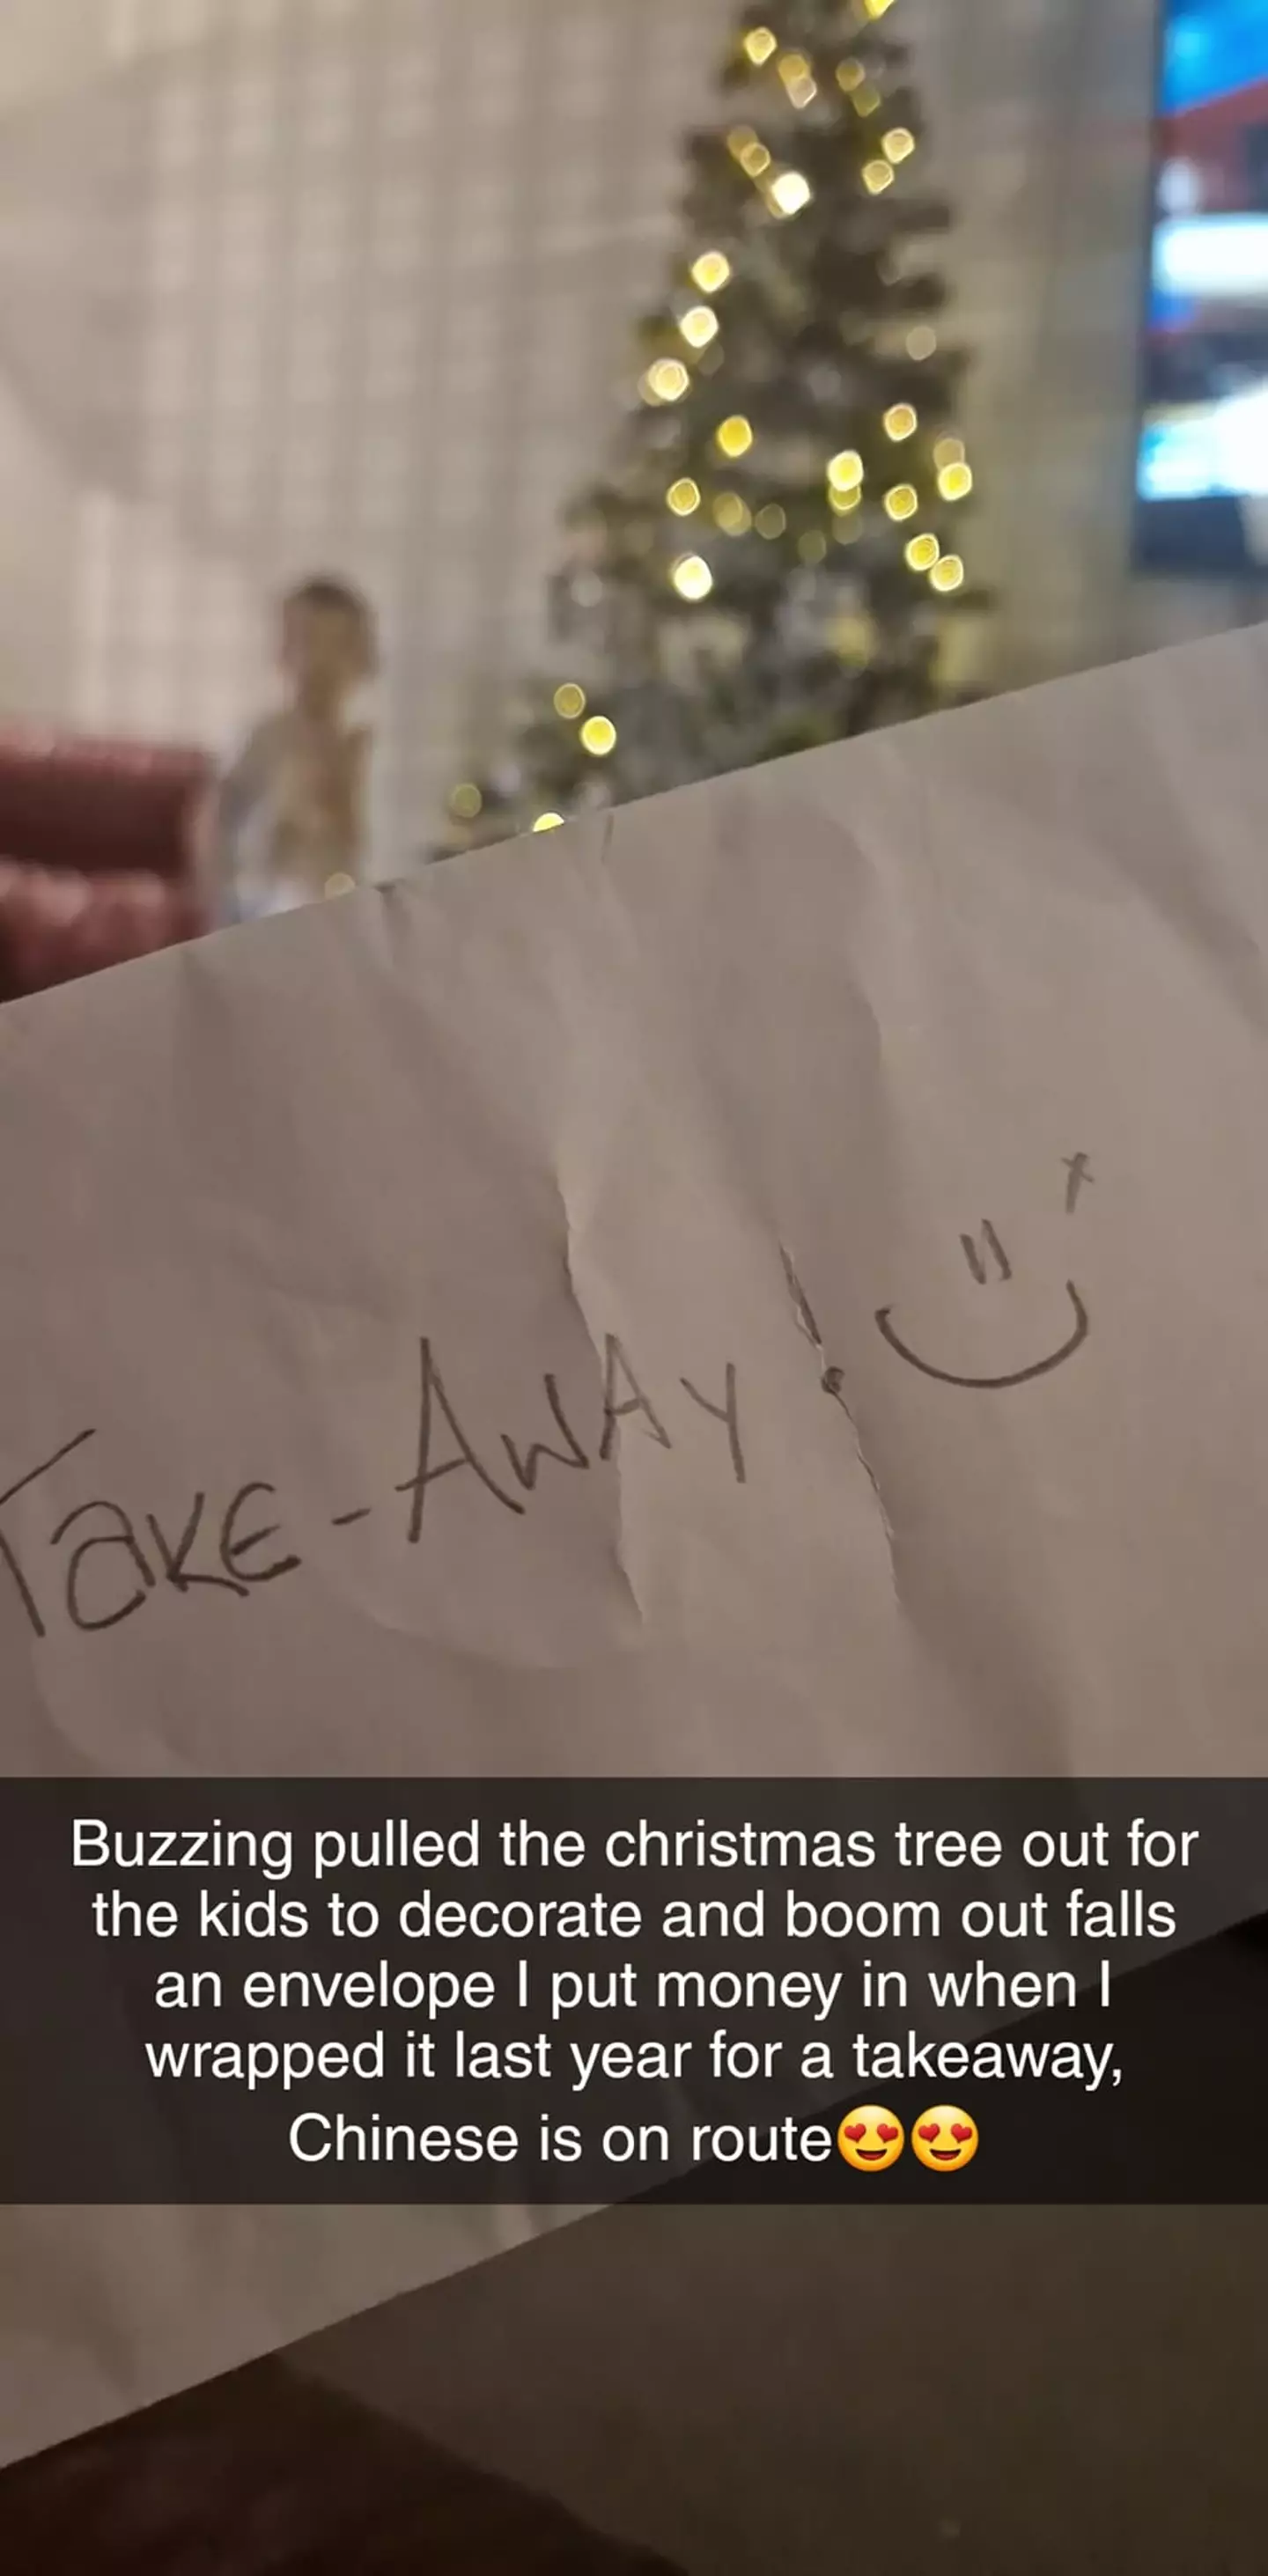 People were touched by the mum’s heartwarming Christmas tradition.